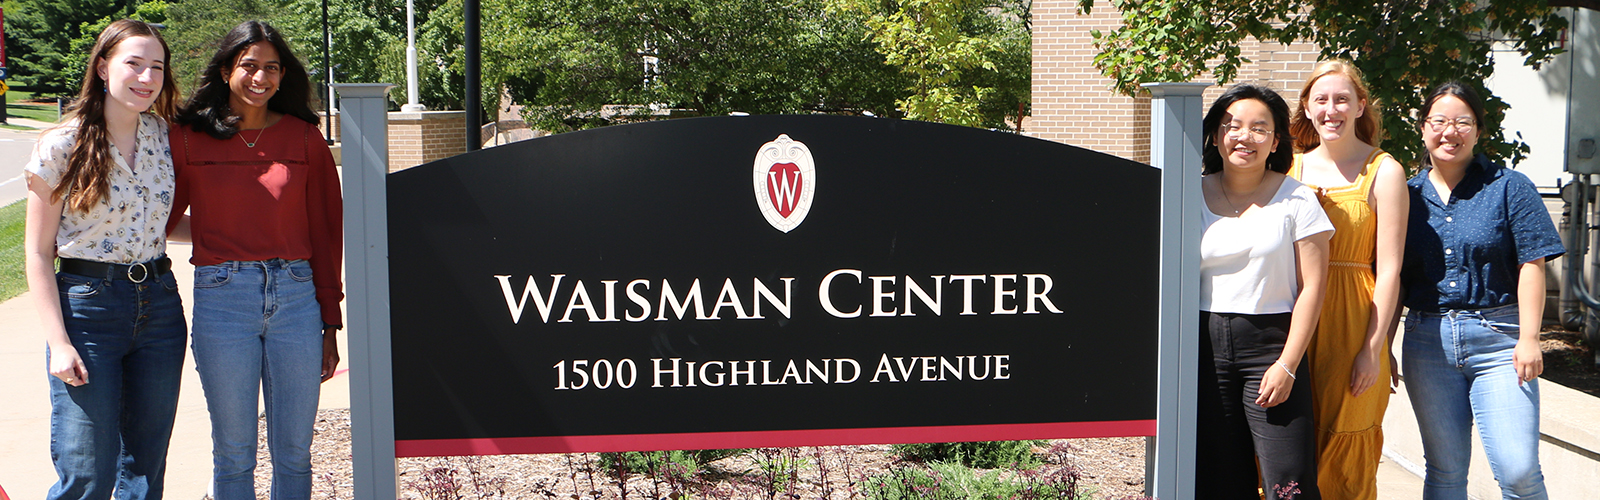 Lawrence University Students Summer Research at Waisman